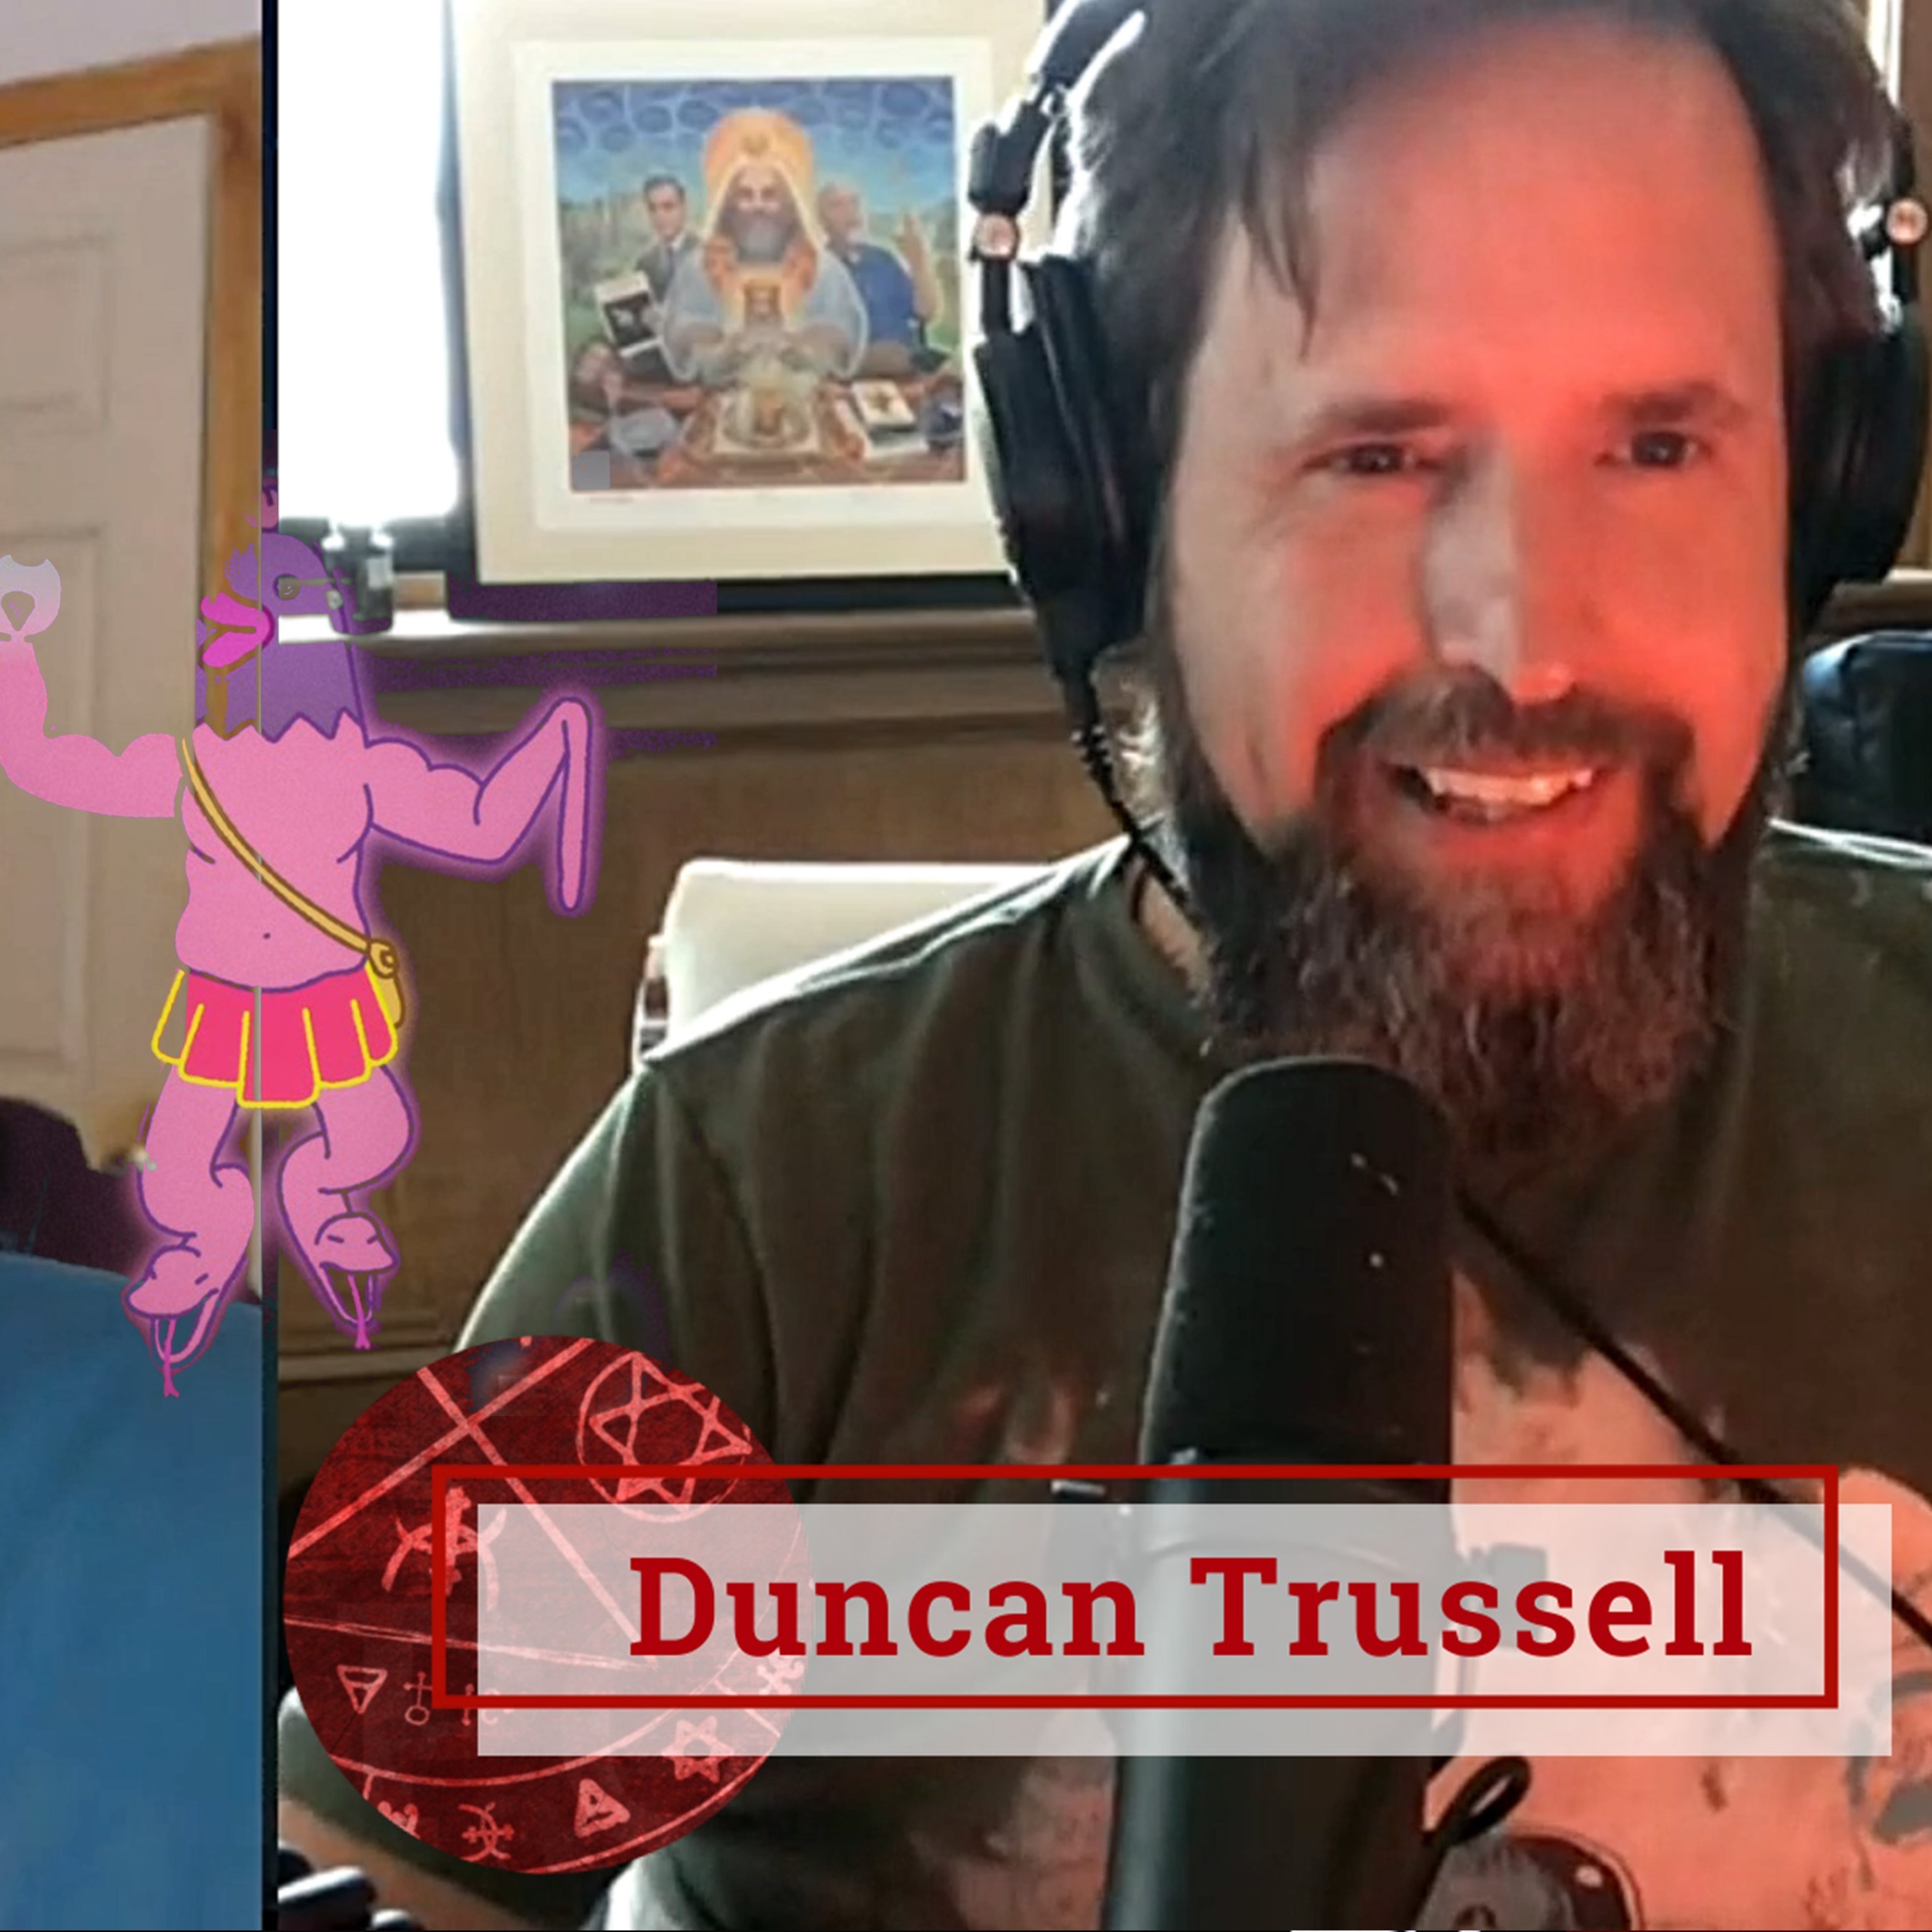 Duncan Trussell on Preparing for Death and Having a Near-Life Experience